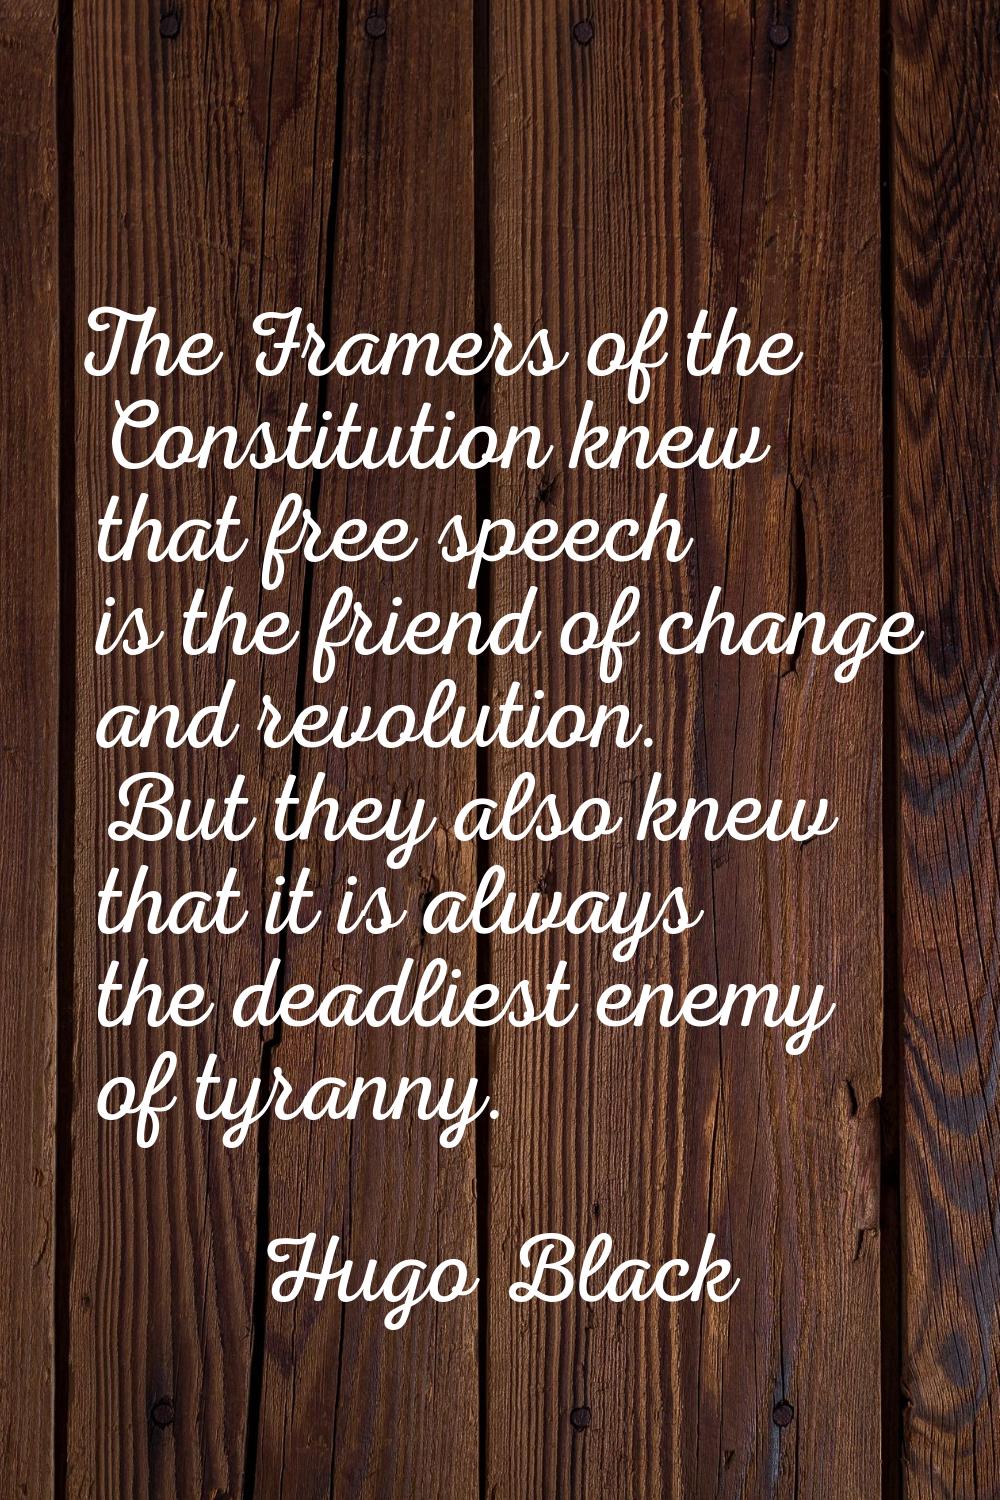 The Framers of the Constitution knew that free speech is the friend of change and revolution. But t